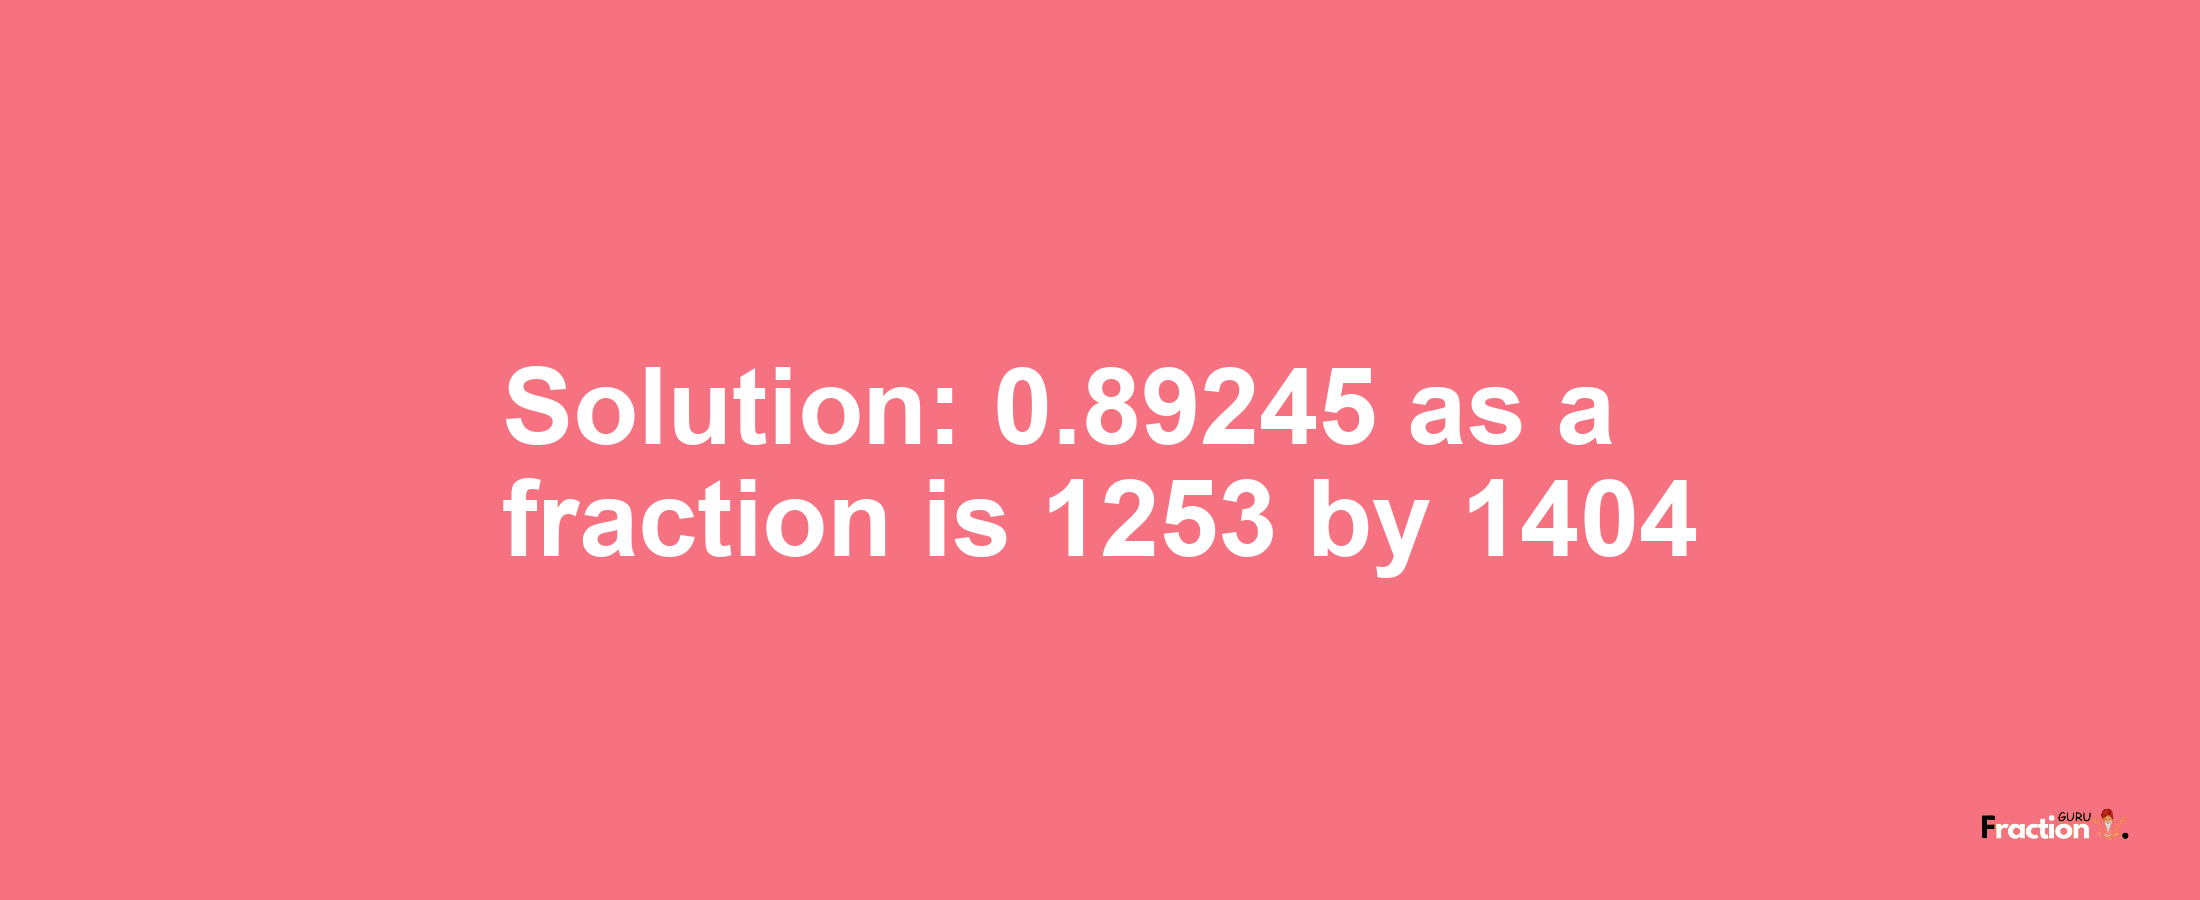 Solution:0.89245 as a fraction is 1253/1404